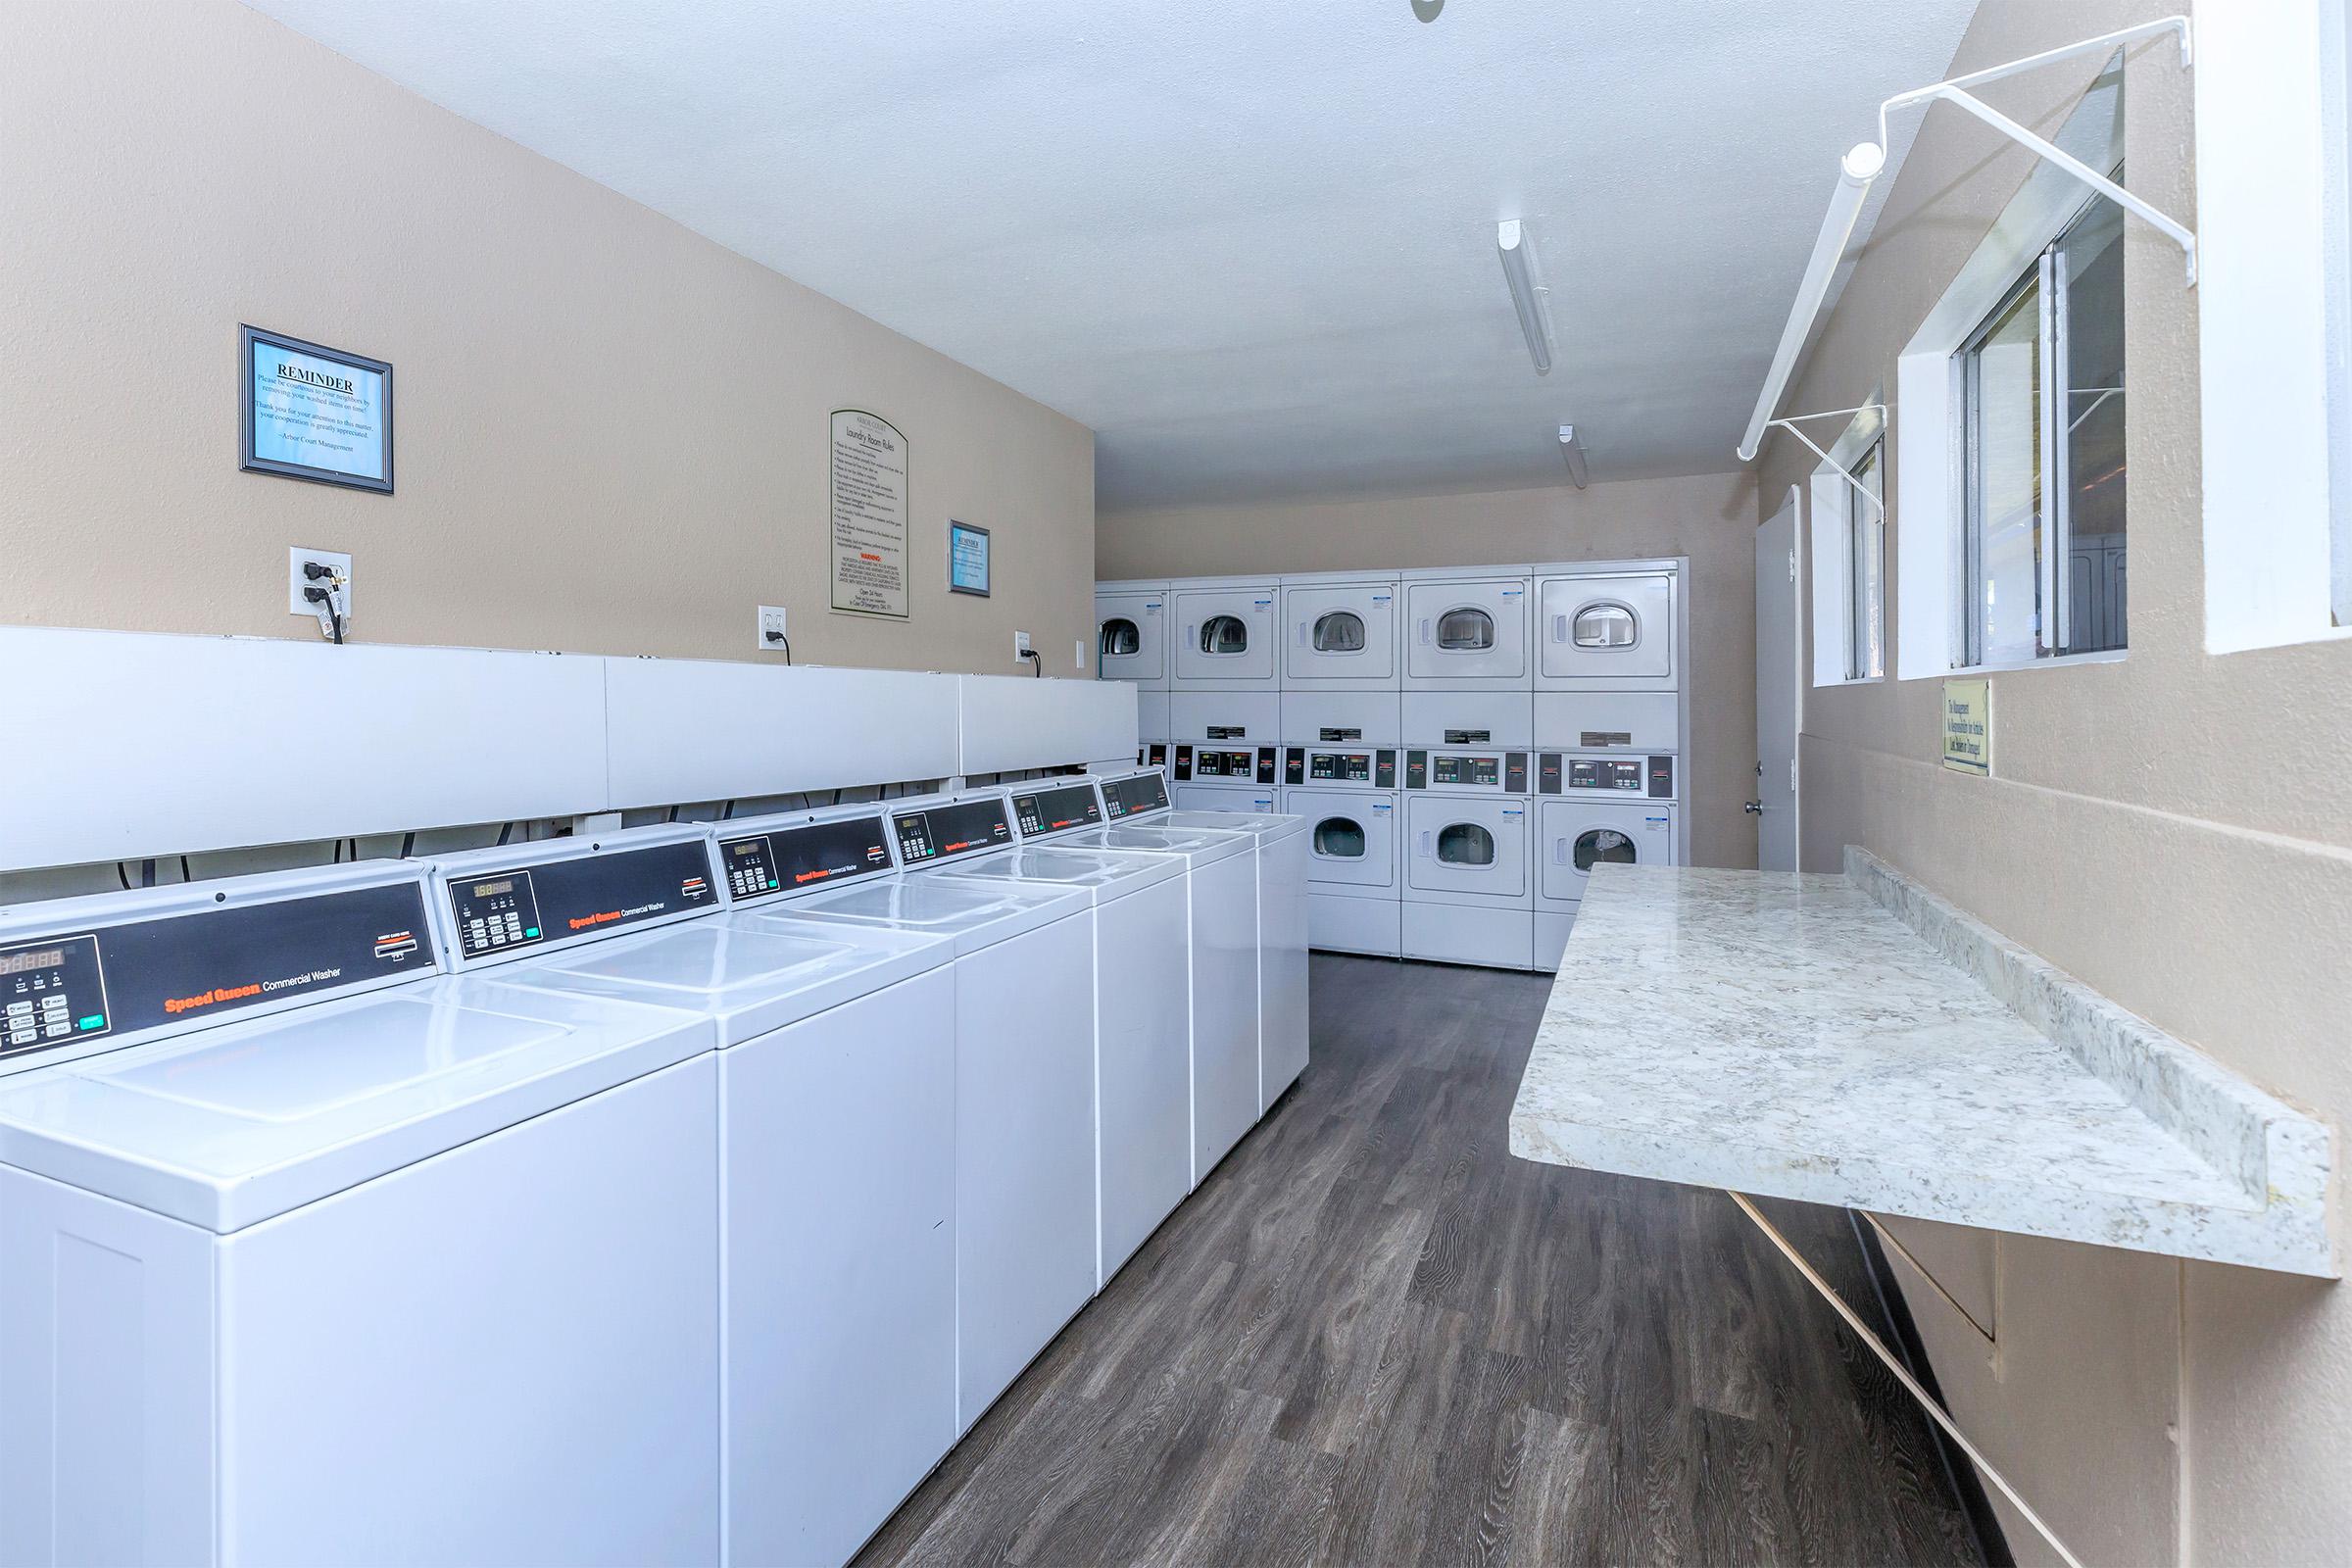 Washer and dryers in Laundry room